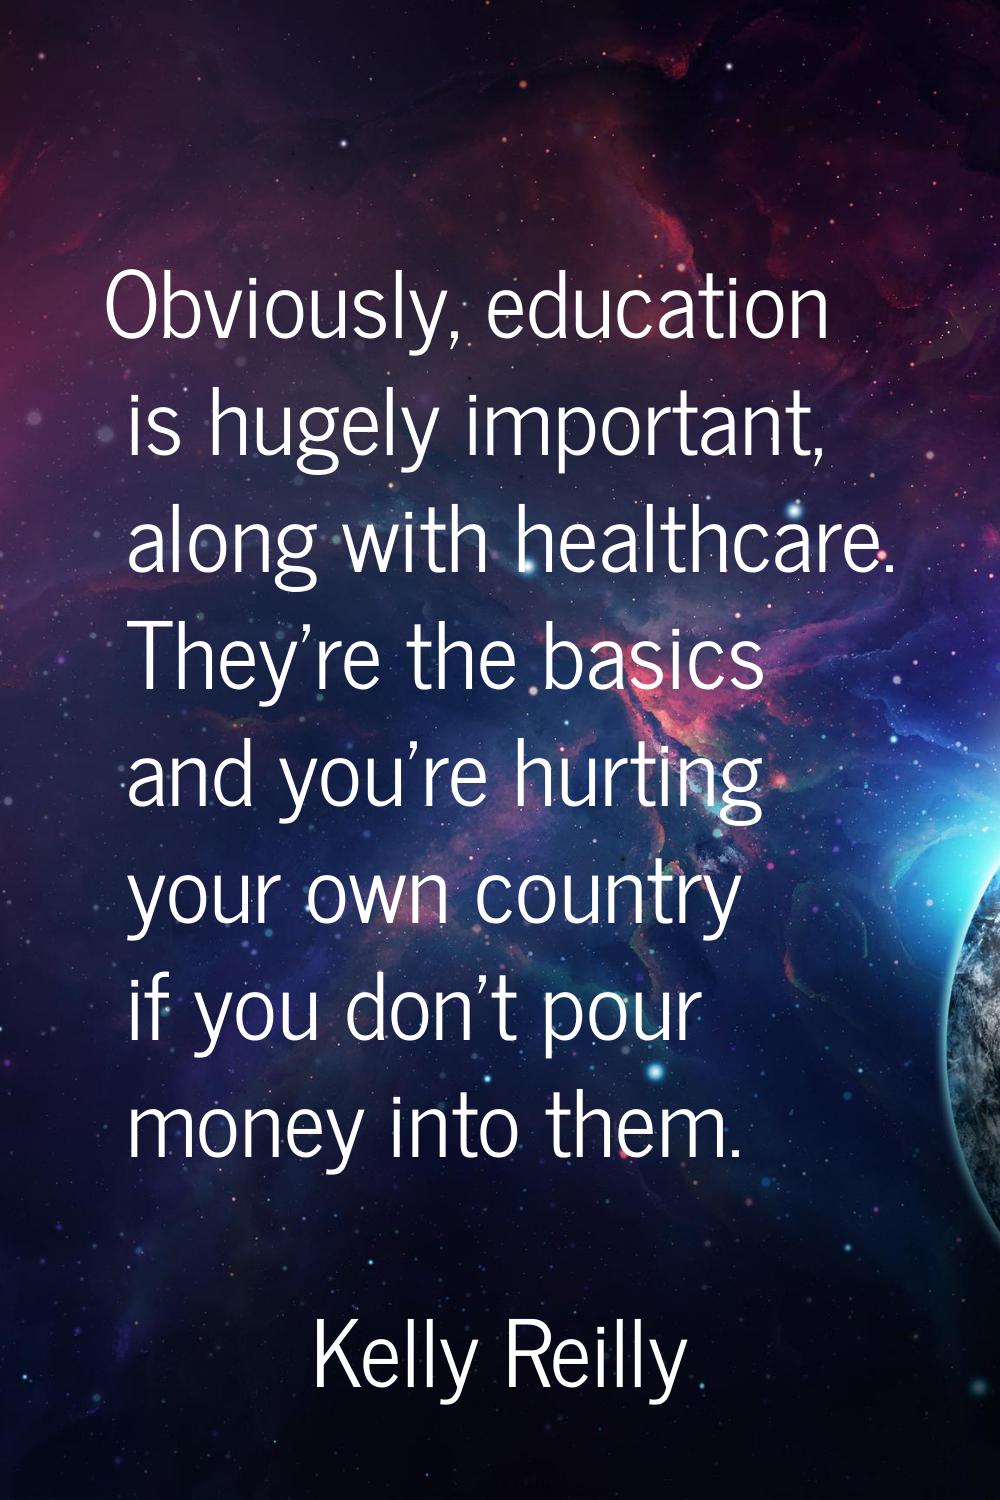 Obviously, education is hugely important, along with healthcare. They're the basics and you're hurt